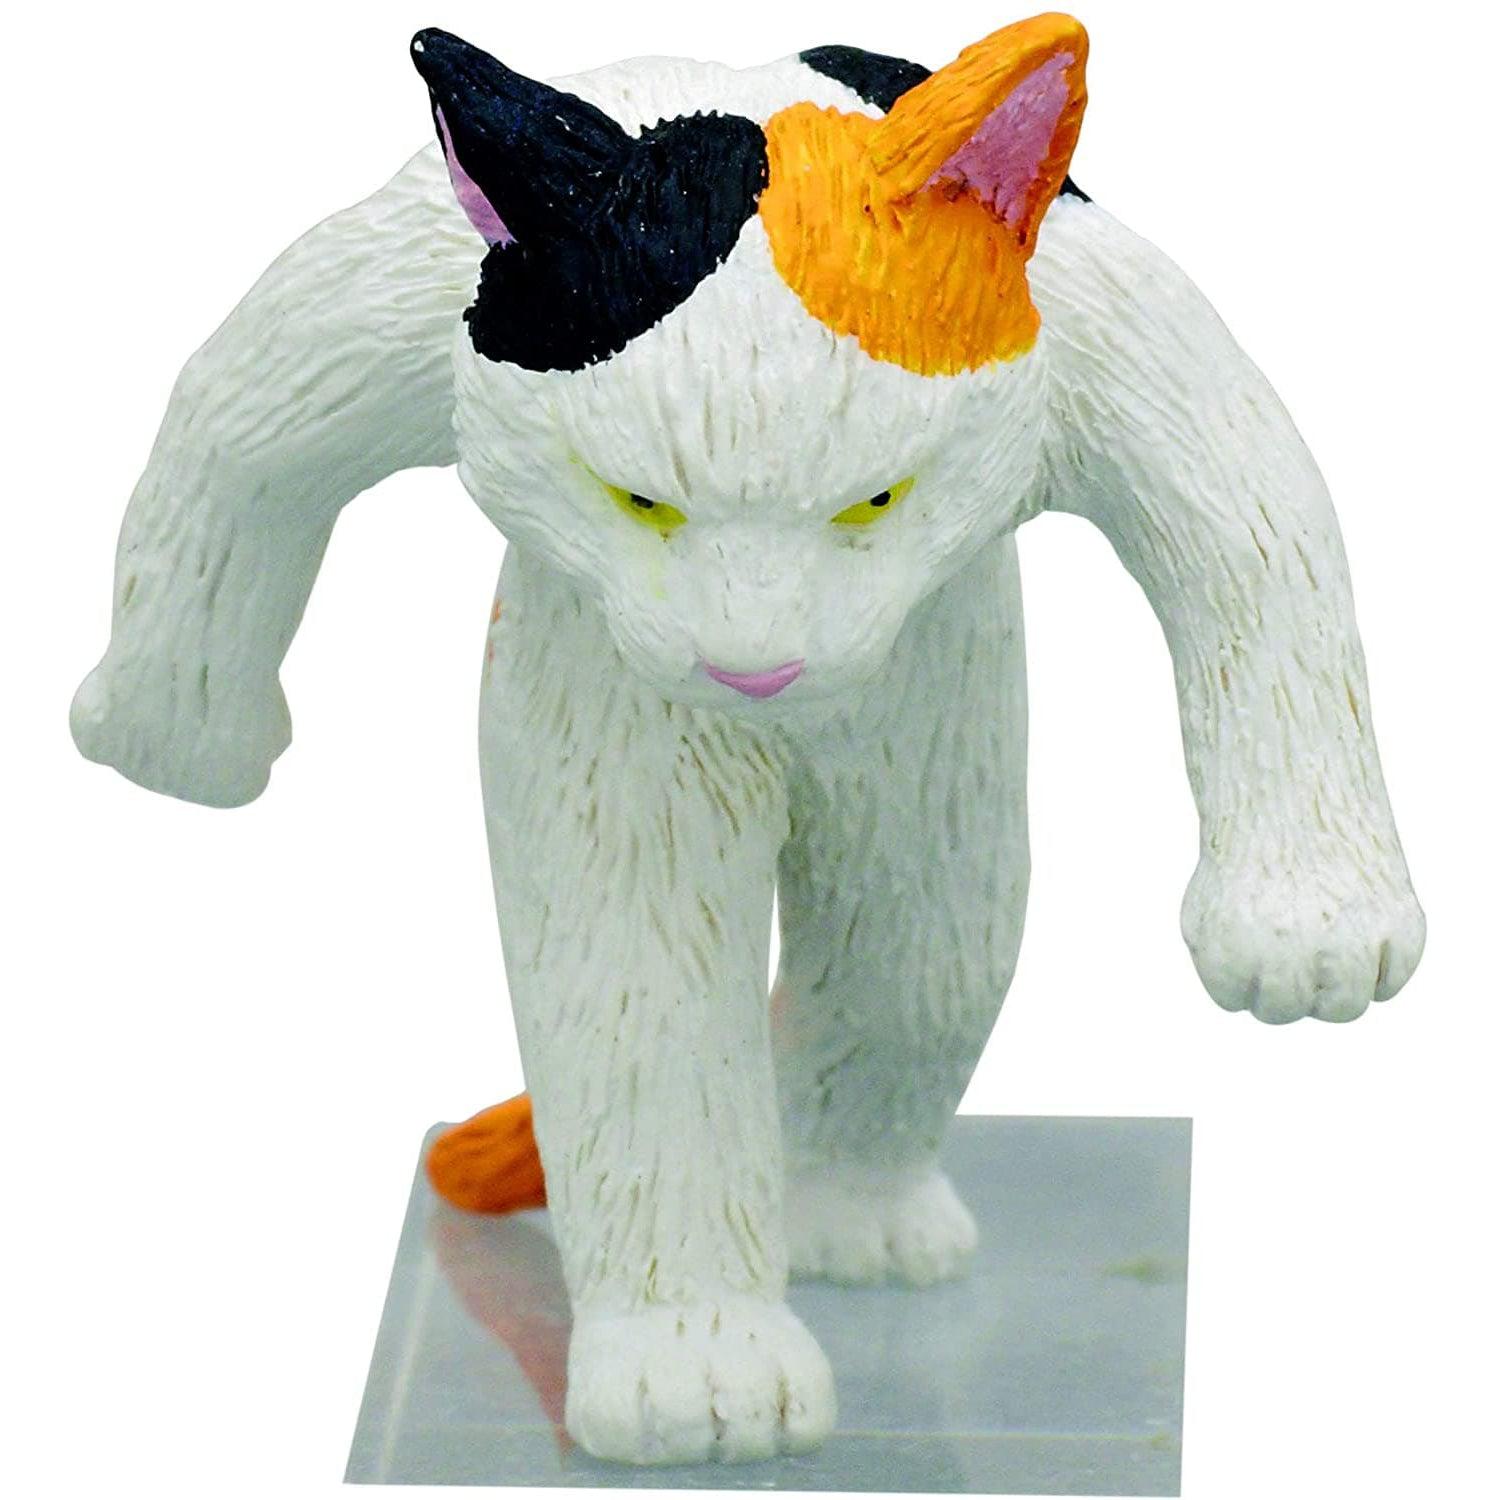 Clever Idiots-Kitan Club - Tough Cat Blind Box - Assorted Styles-KC-037-Legacy Toys